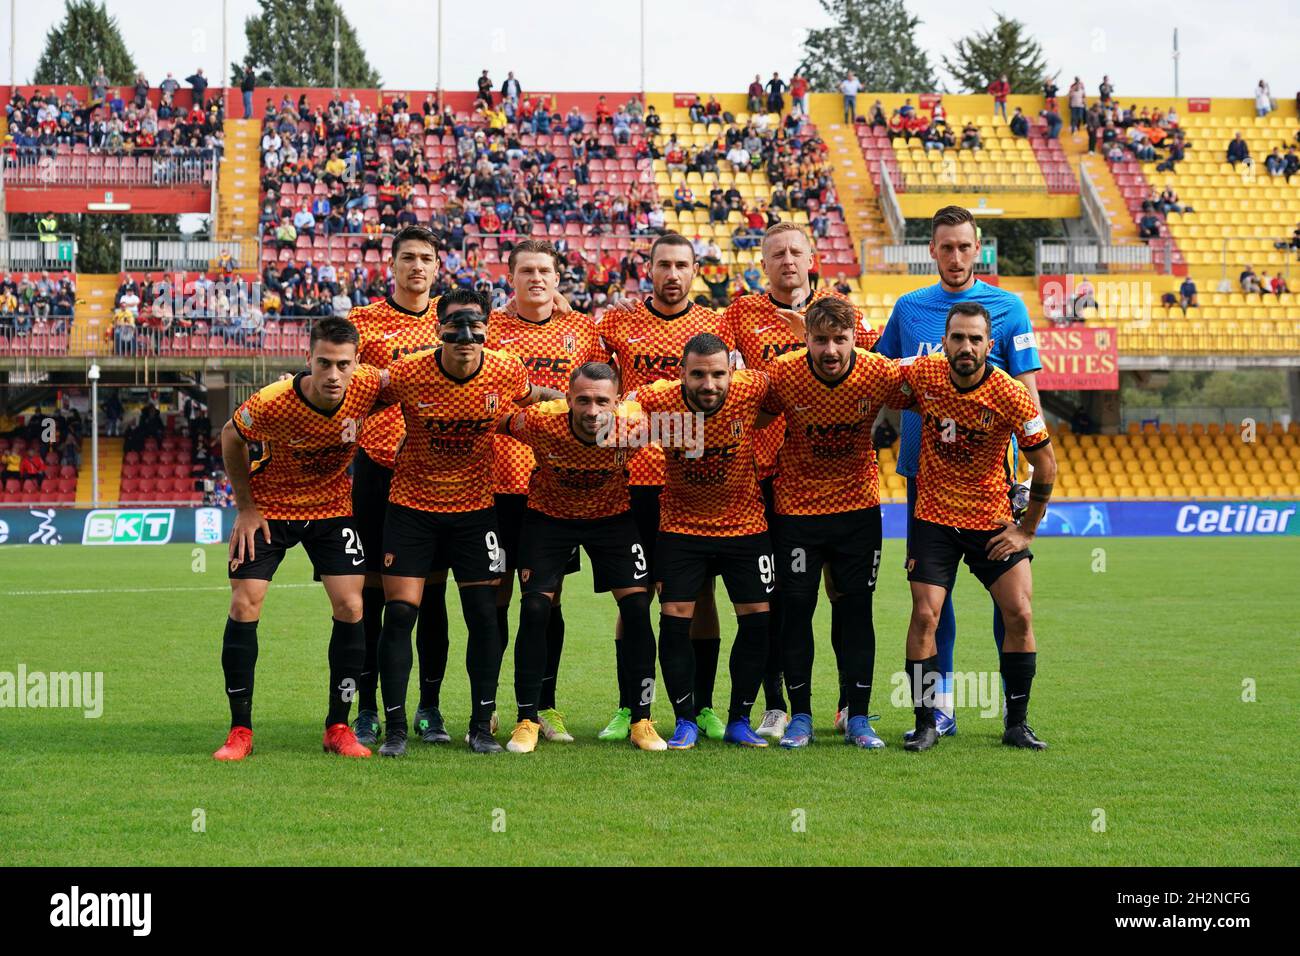 Benevento, Italy. 23rd Oct, 2021. Benevento Calcio during Benevento Calcio  vs Cosenza Calcio, Italian Football Championship League BKT in Benevento,  Italy, October 23 2021 Credit: Independent Photo Agency/Alamy Live News  Stock Photo - Alamy